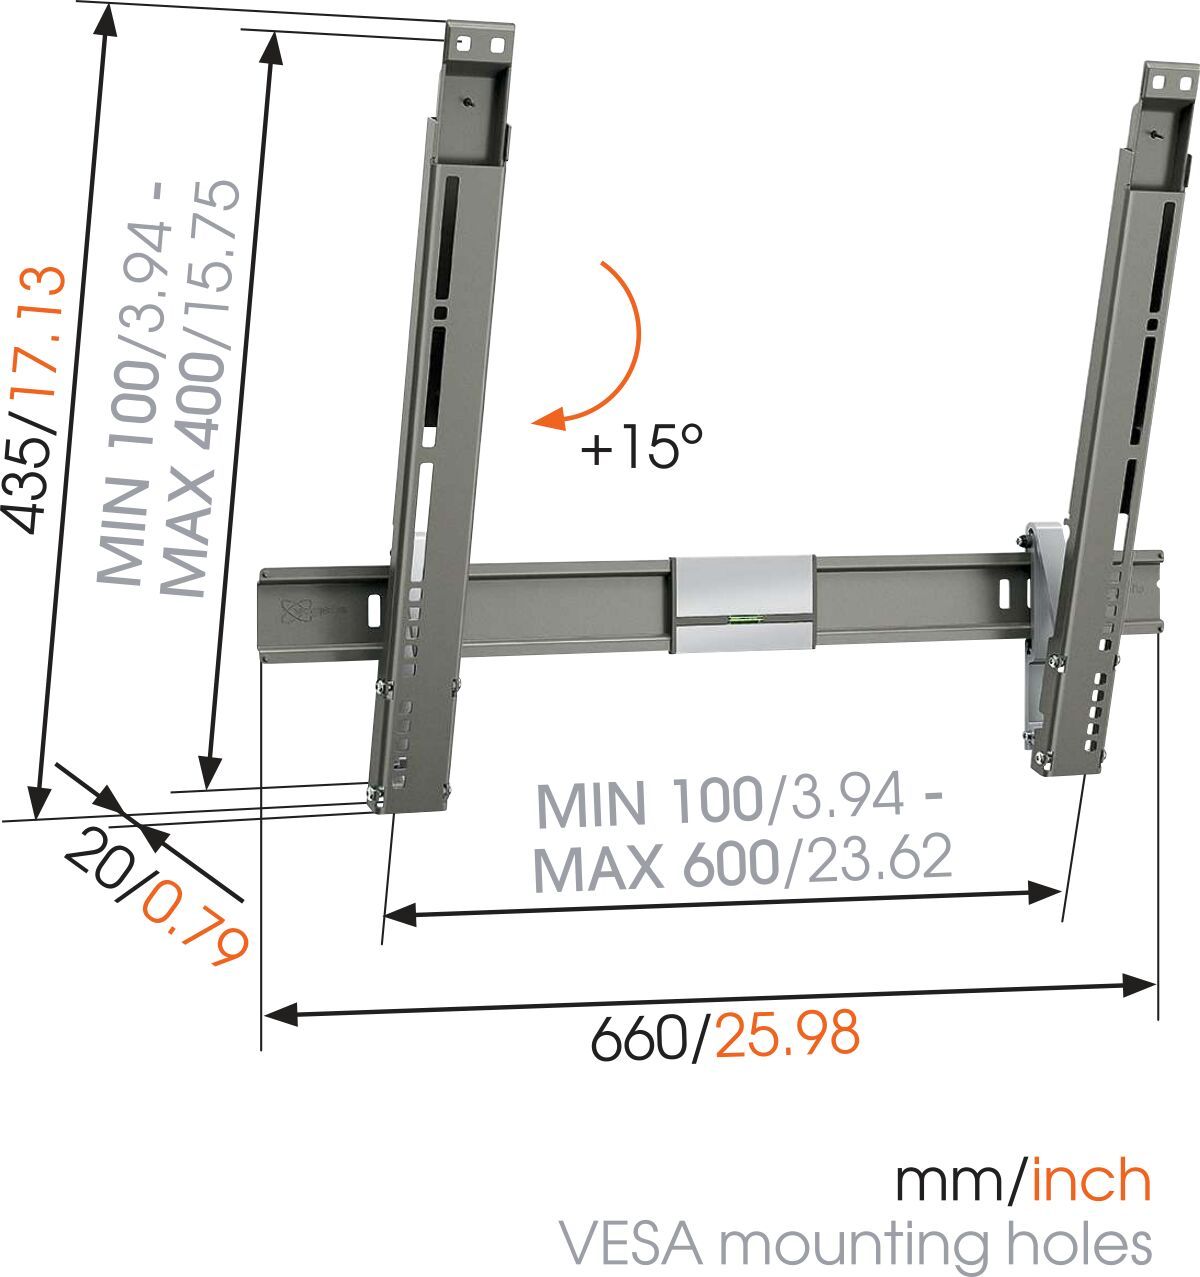 Vogel's THIN 315 UltraThin Tilting TV Wall Mount - Suitable for 40 up to 65 inch TVs up to Tilt up to 15° - Dimensions